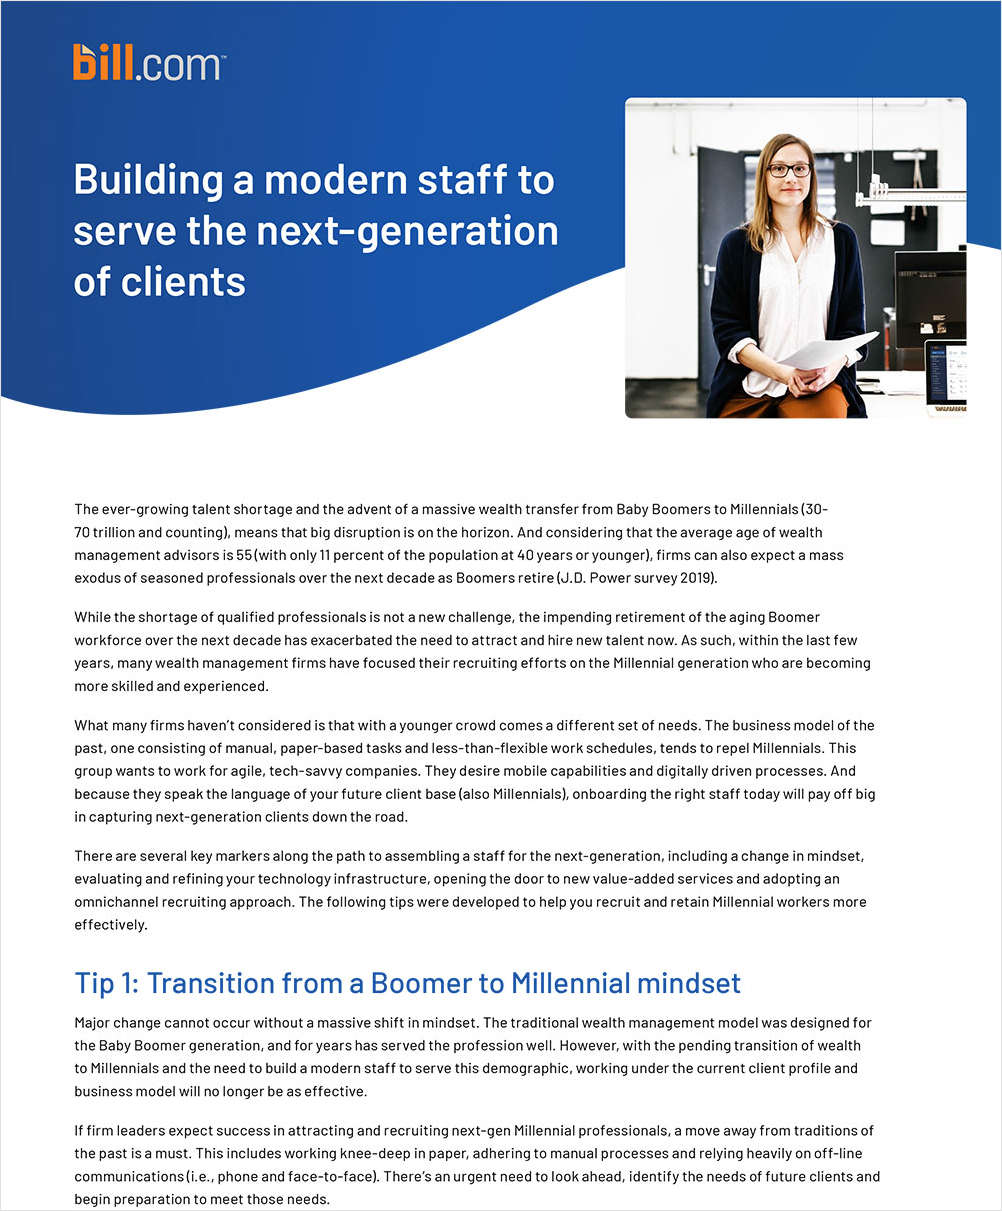 Building a Modern Staff to Serve the Next Generation of Clients